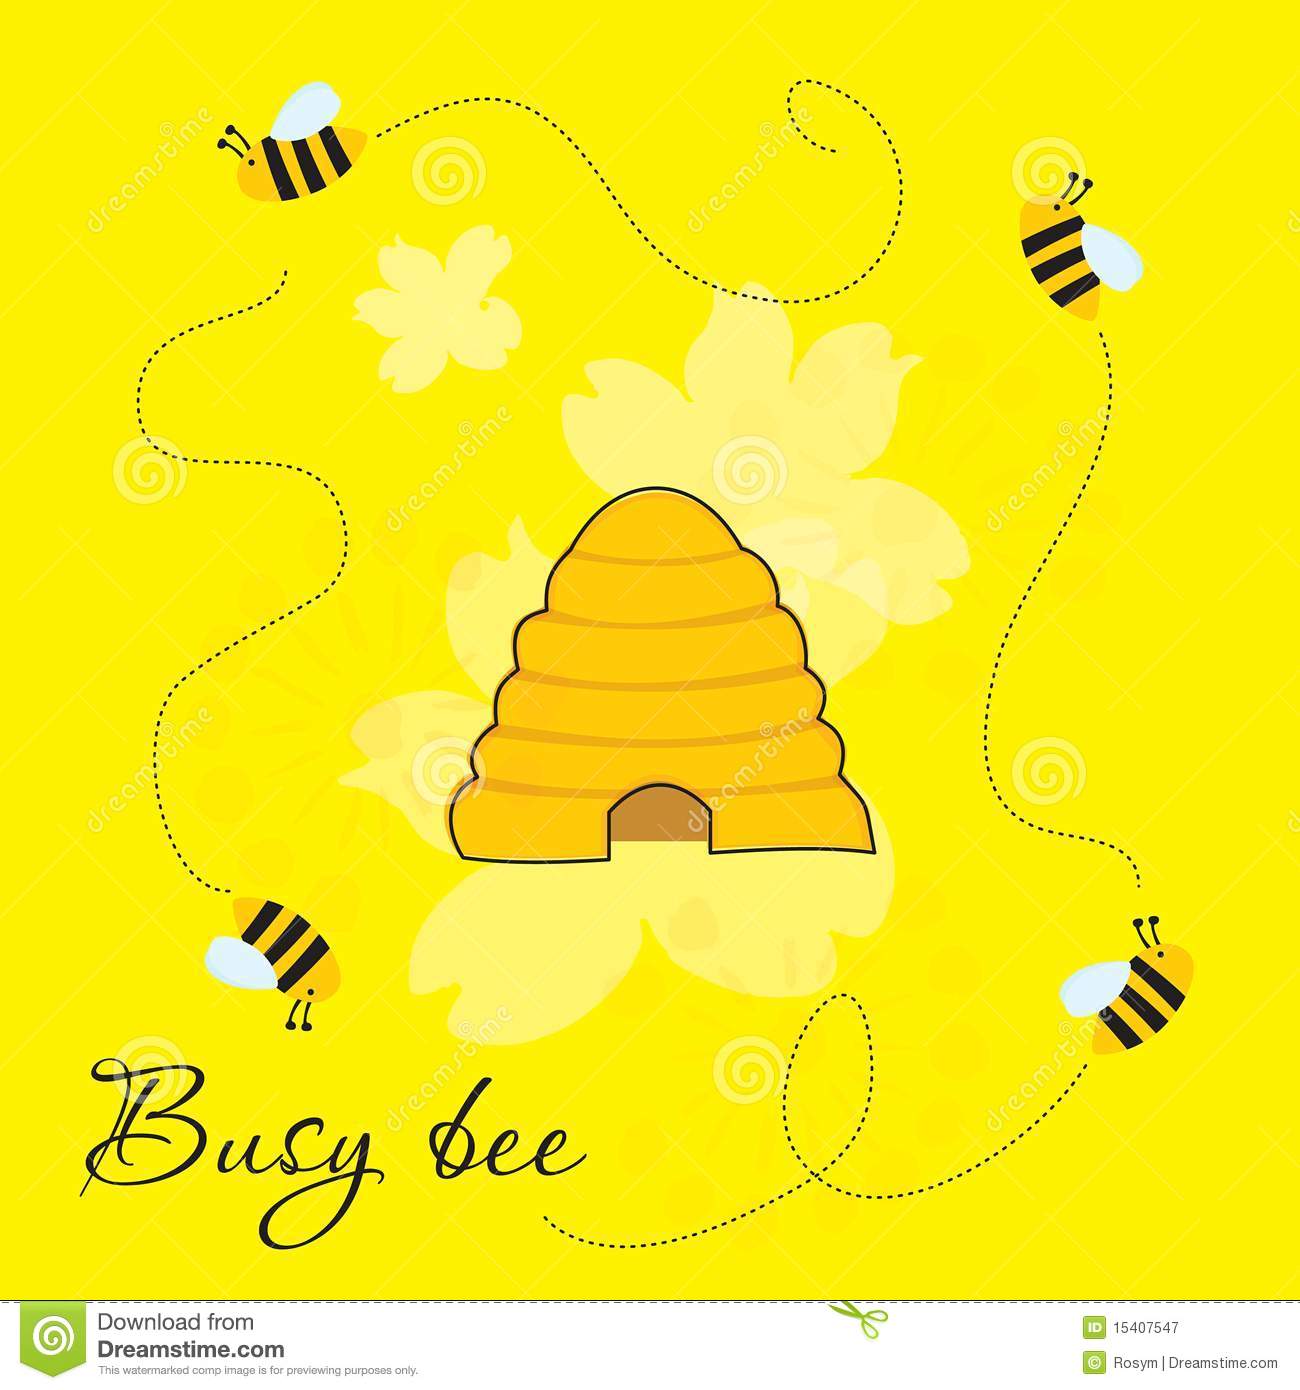 Busy Bees Around Beehive Royalty Free Stock Photography   Image